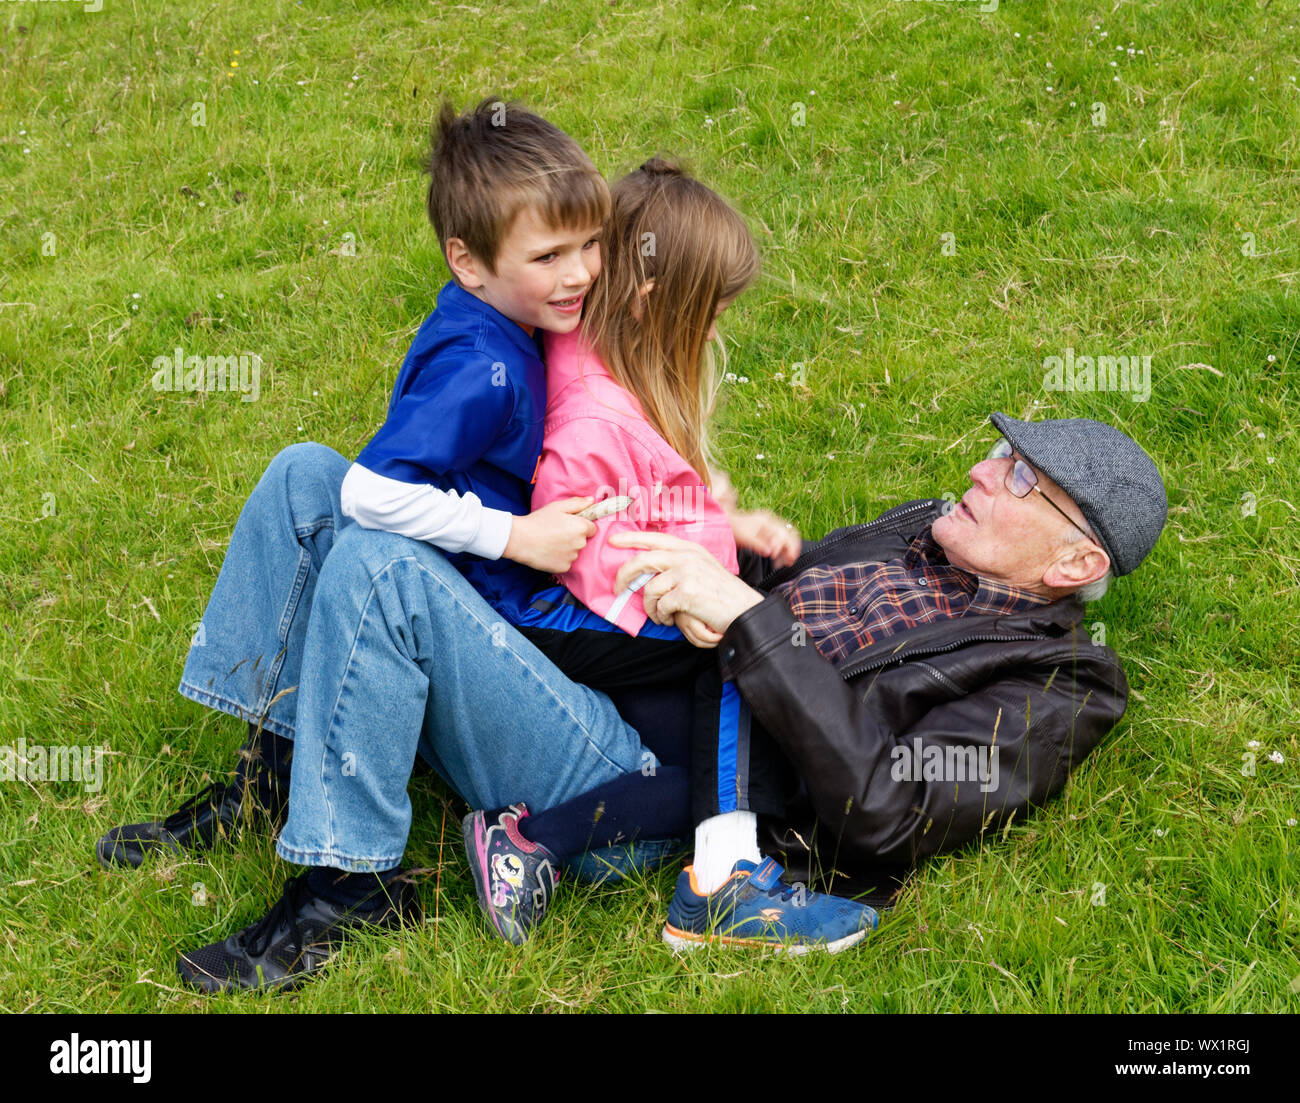 Two children (brother and sister - 7 and 5 yrs old) sat on their grandfather lying on the grass Stock Photo